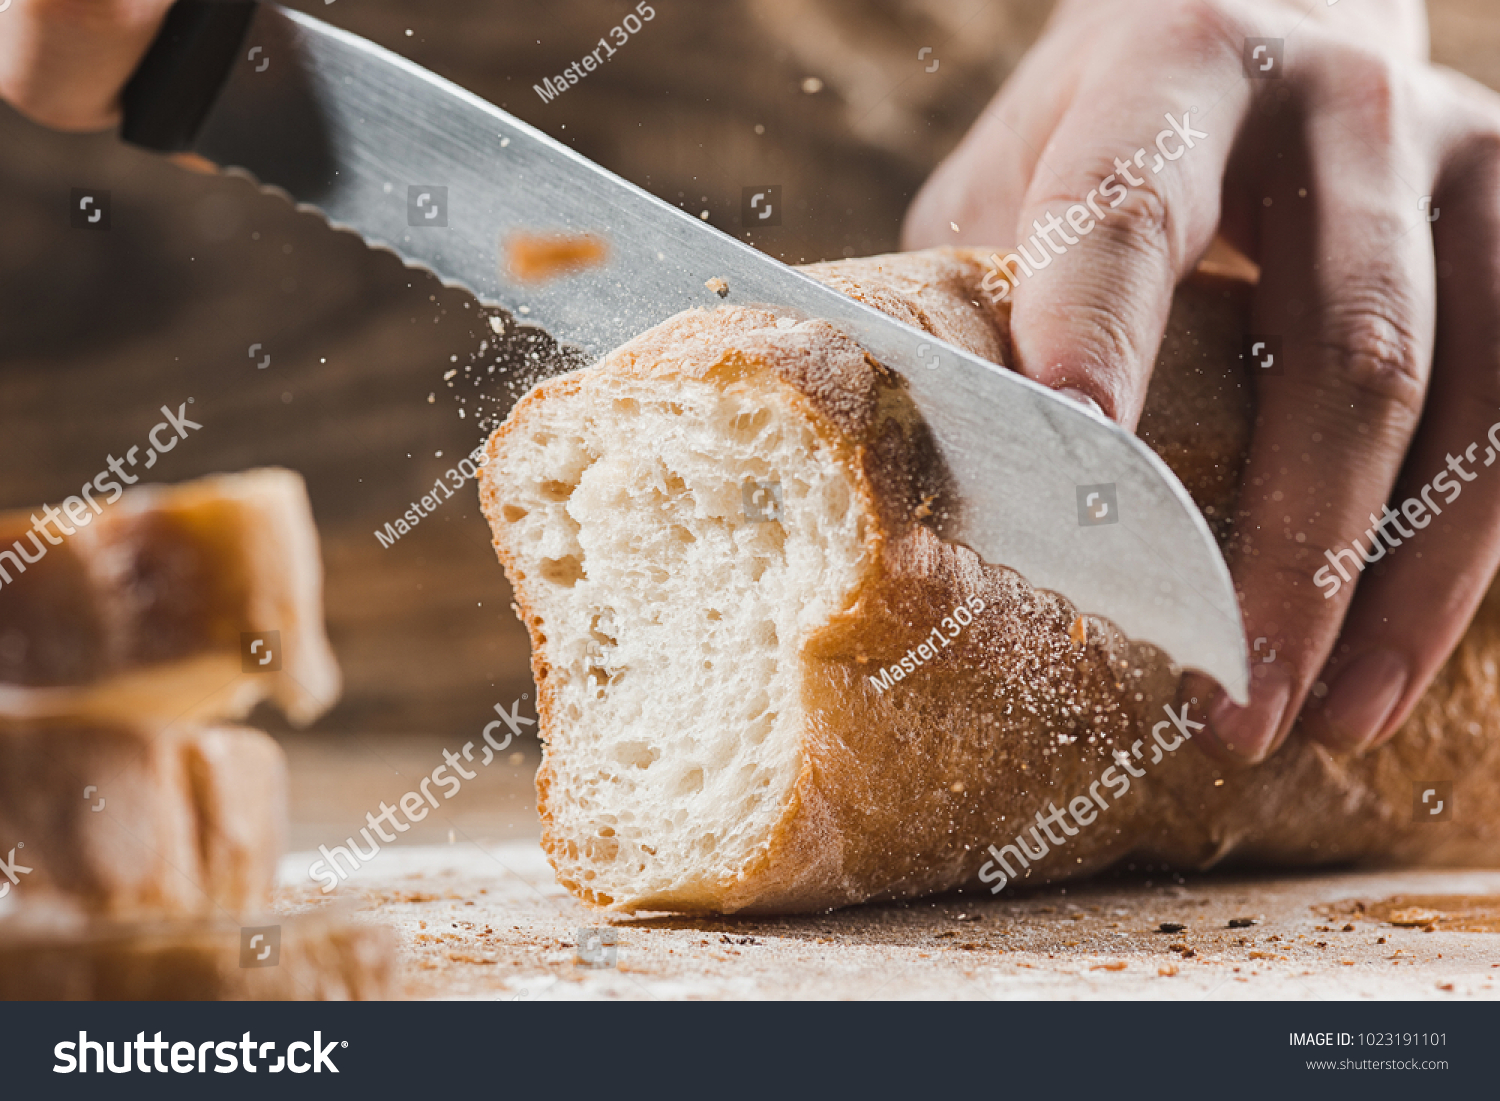 Whole grain bread put on kitchen wood plate with a chef holding gold knife for cut. Fresh bread on table close-up. Fresh bread on the kitchen table The healthy eating and traditional bakery concept #1023191101